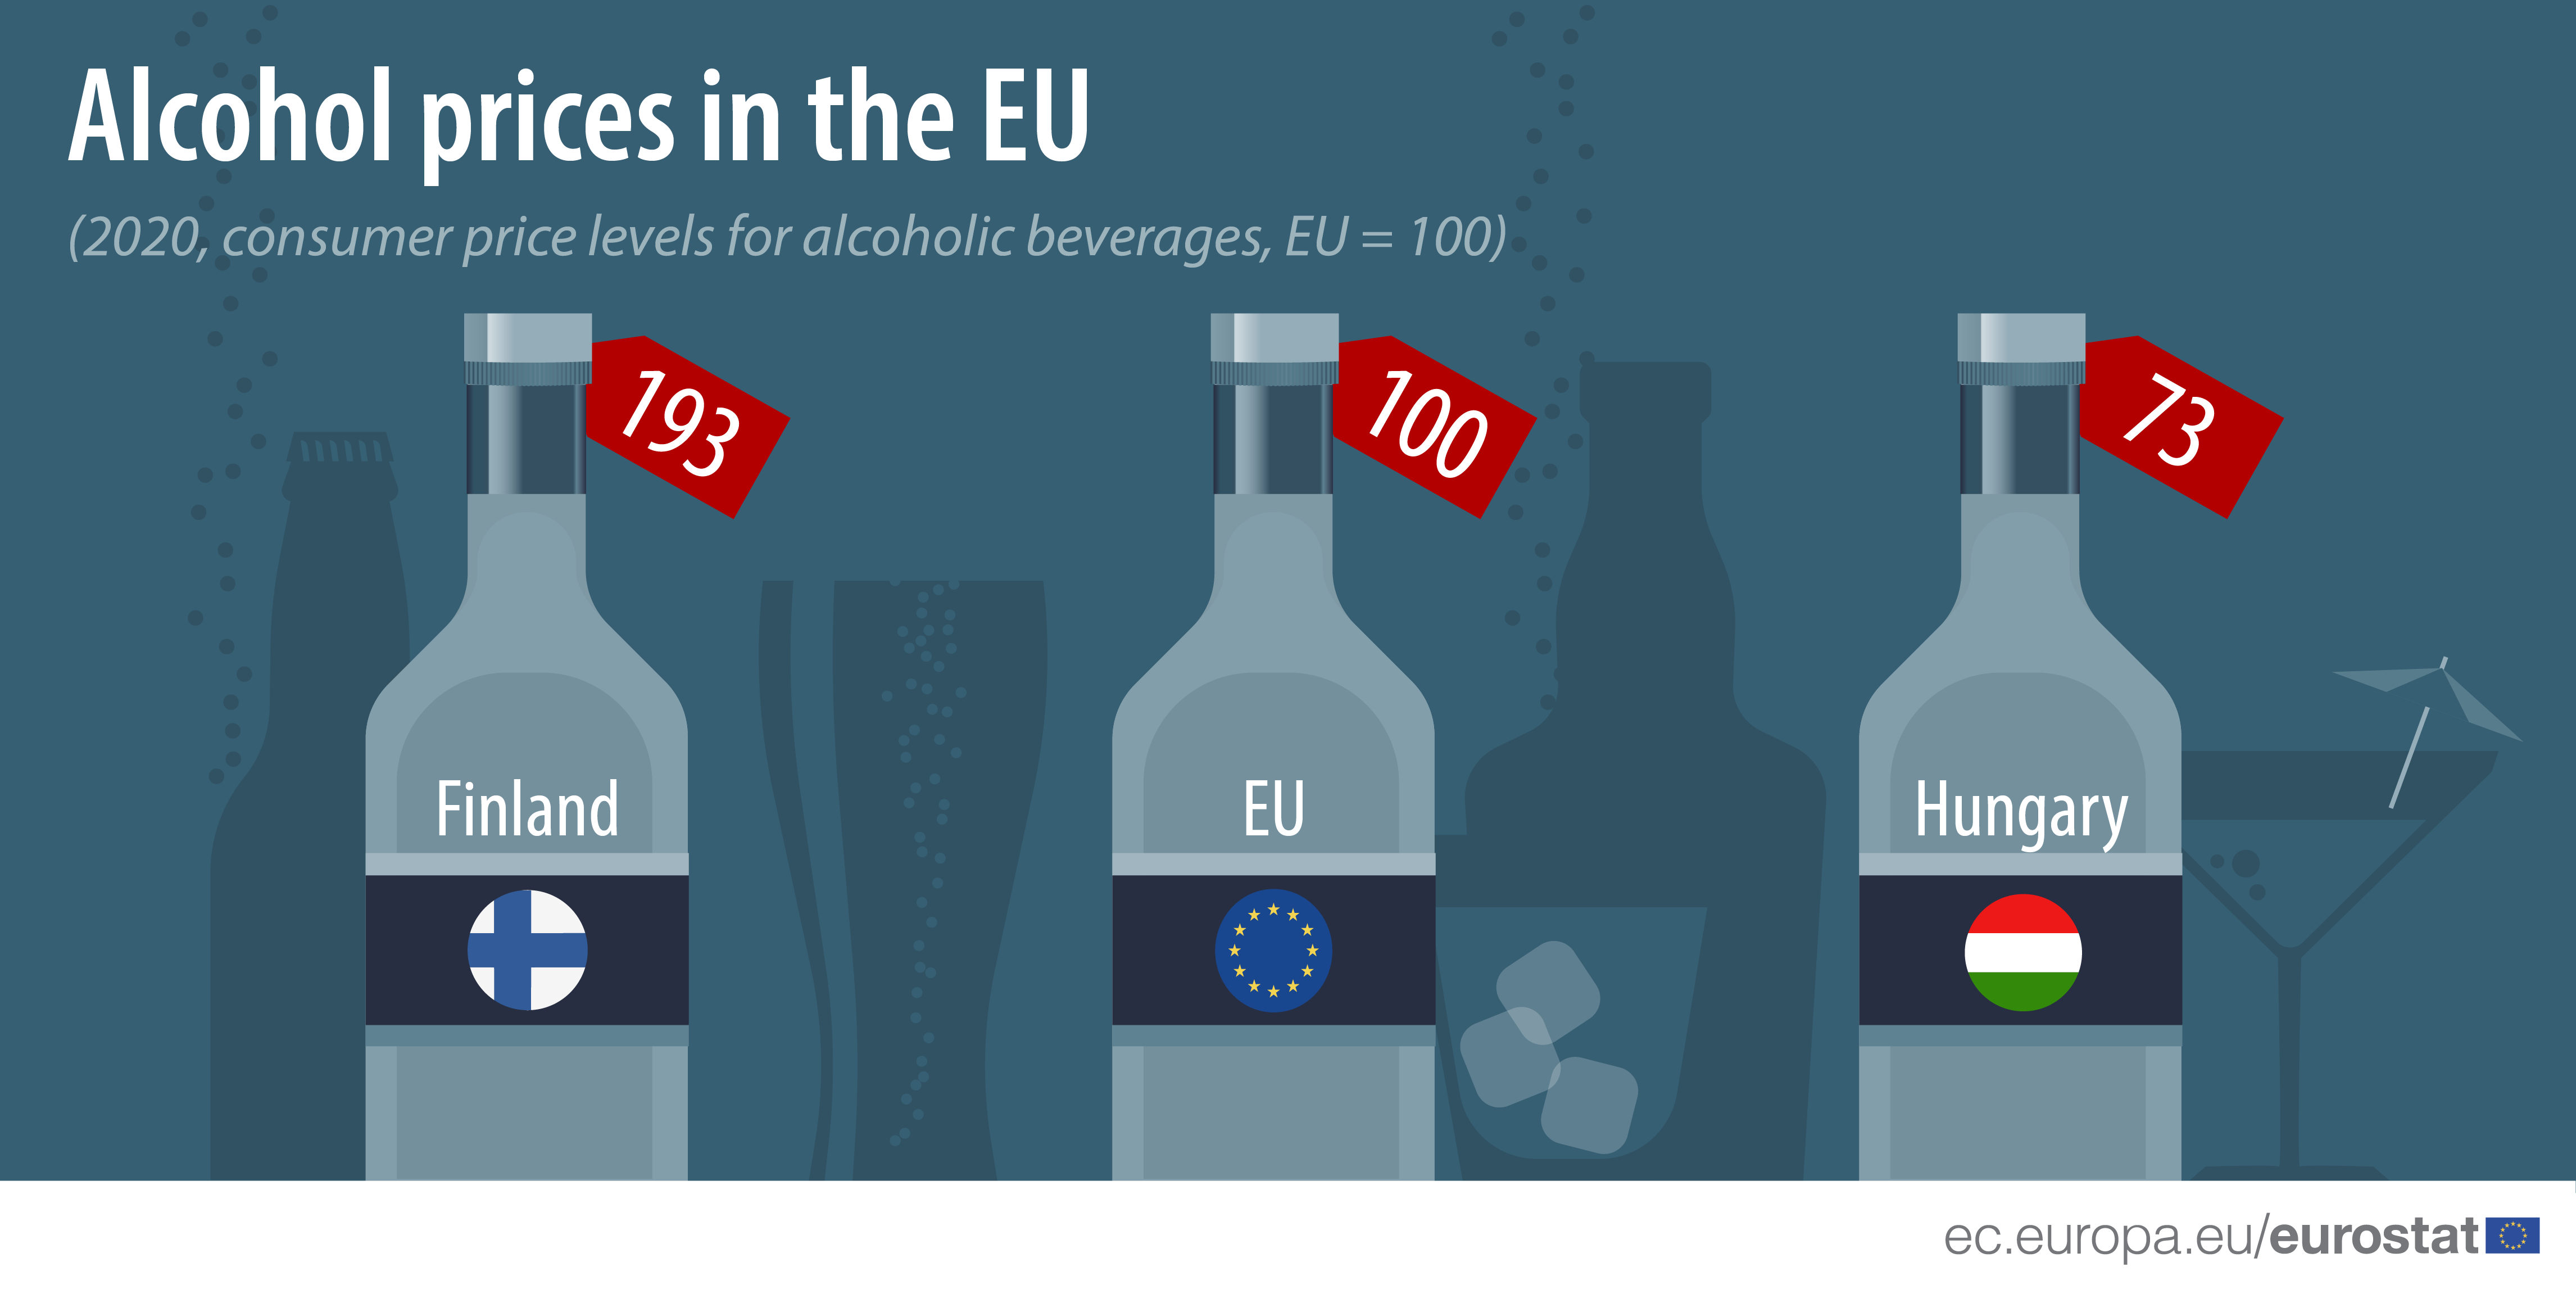 Infographic with the EU country with highest (Finland=193) and lowest (Hungary=73) consumer price levels for alcoholic beverages, EU=100, 2020 data